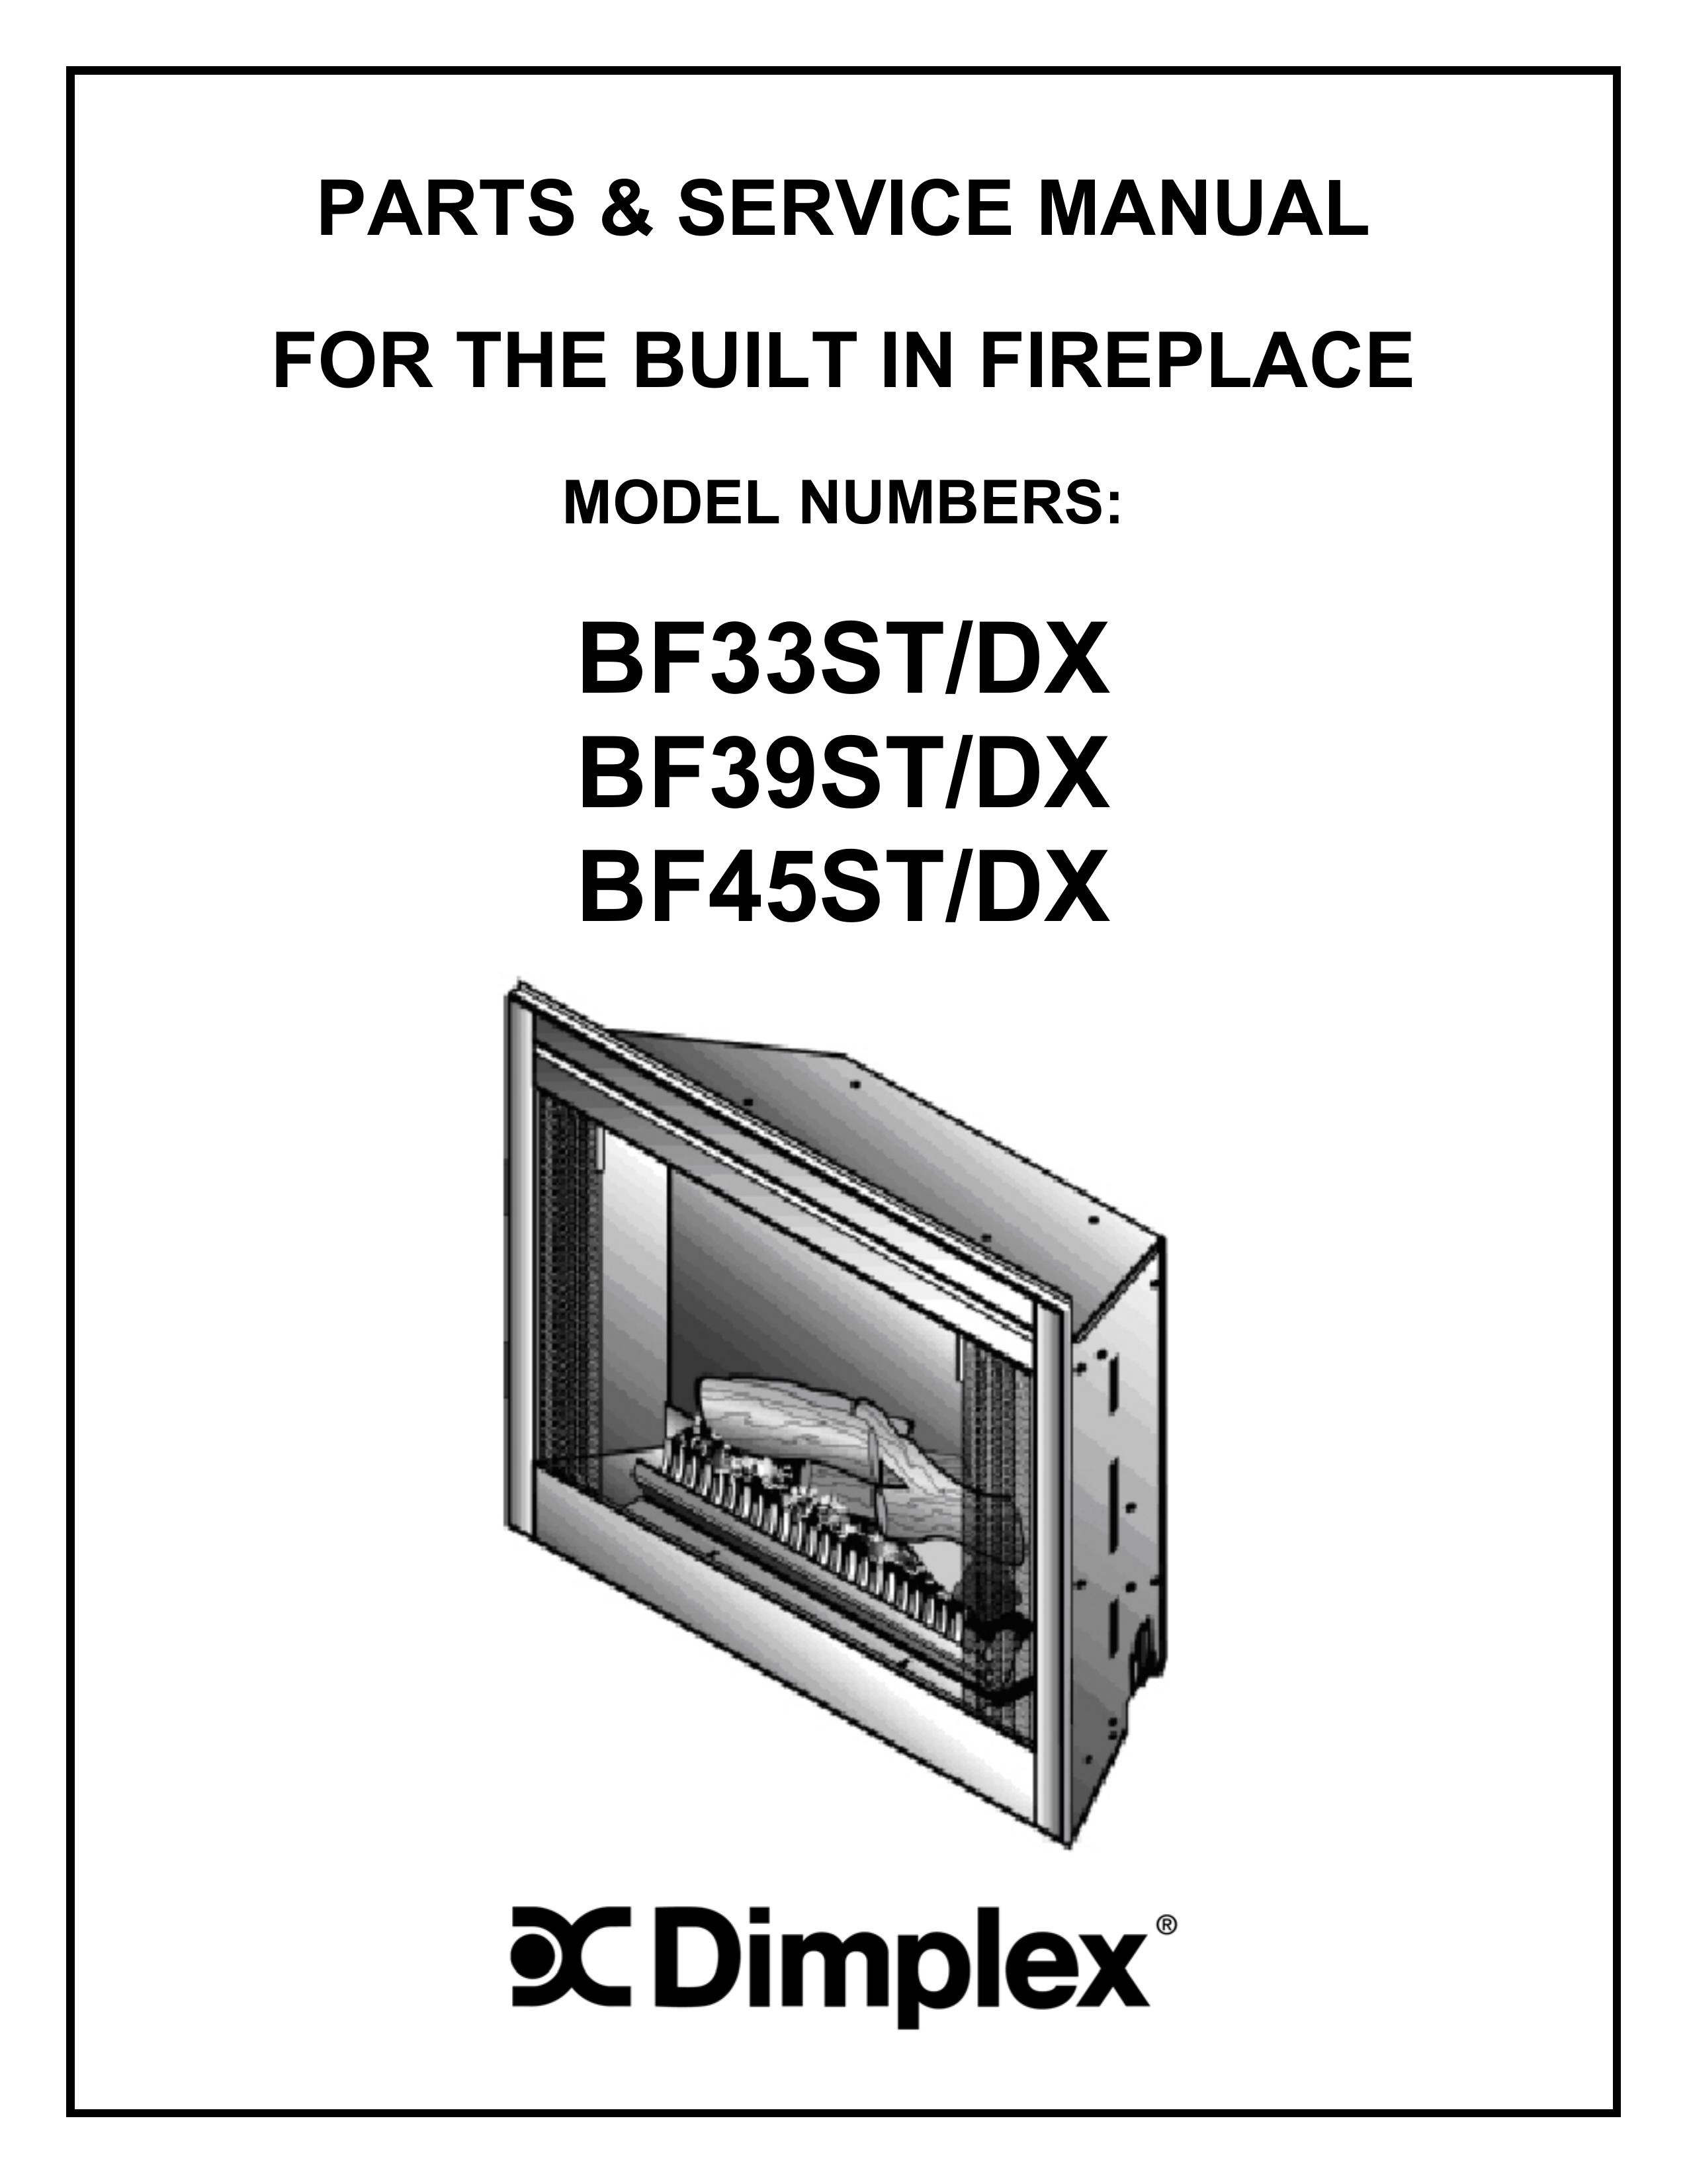 Dimplex BF39ST/DX Fire Pit User Manual